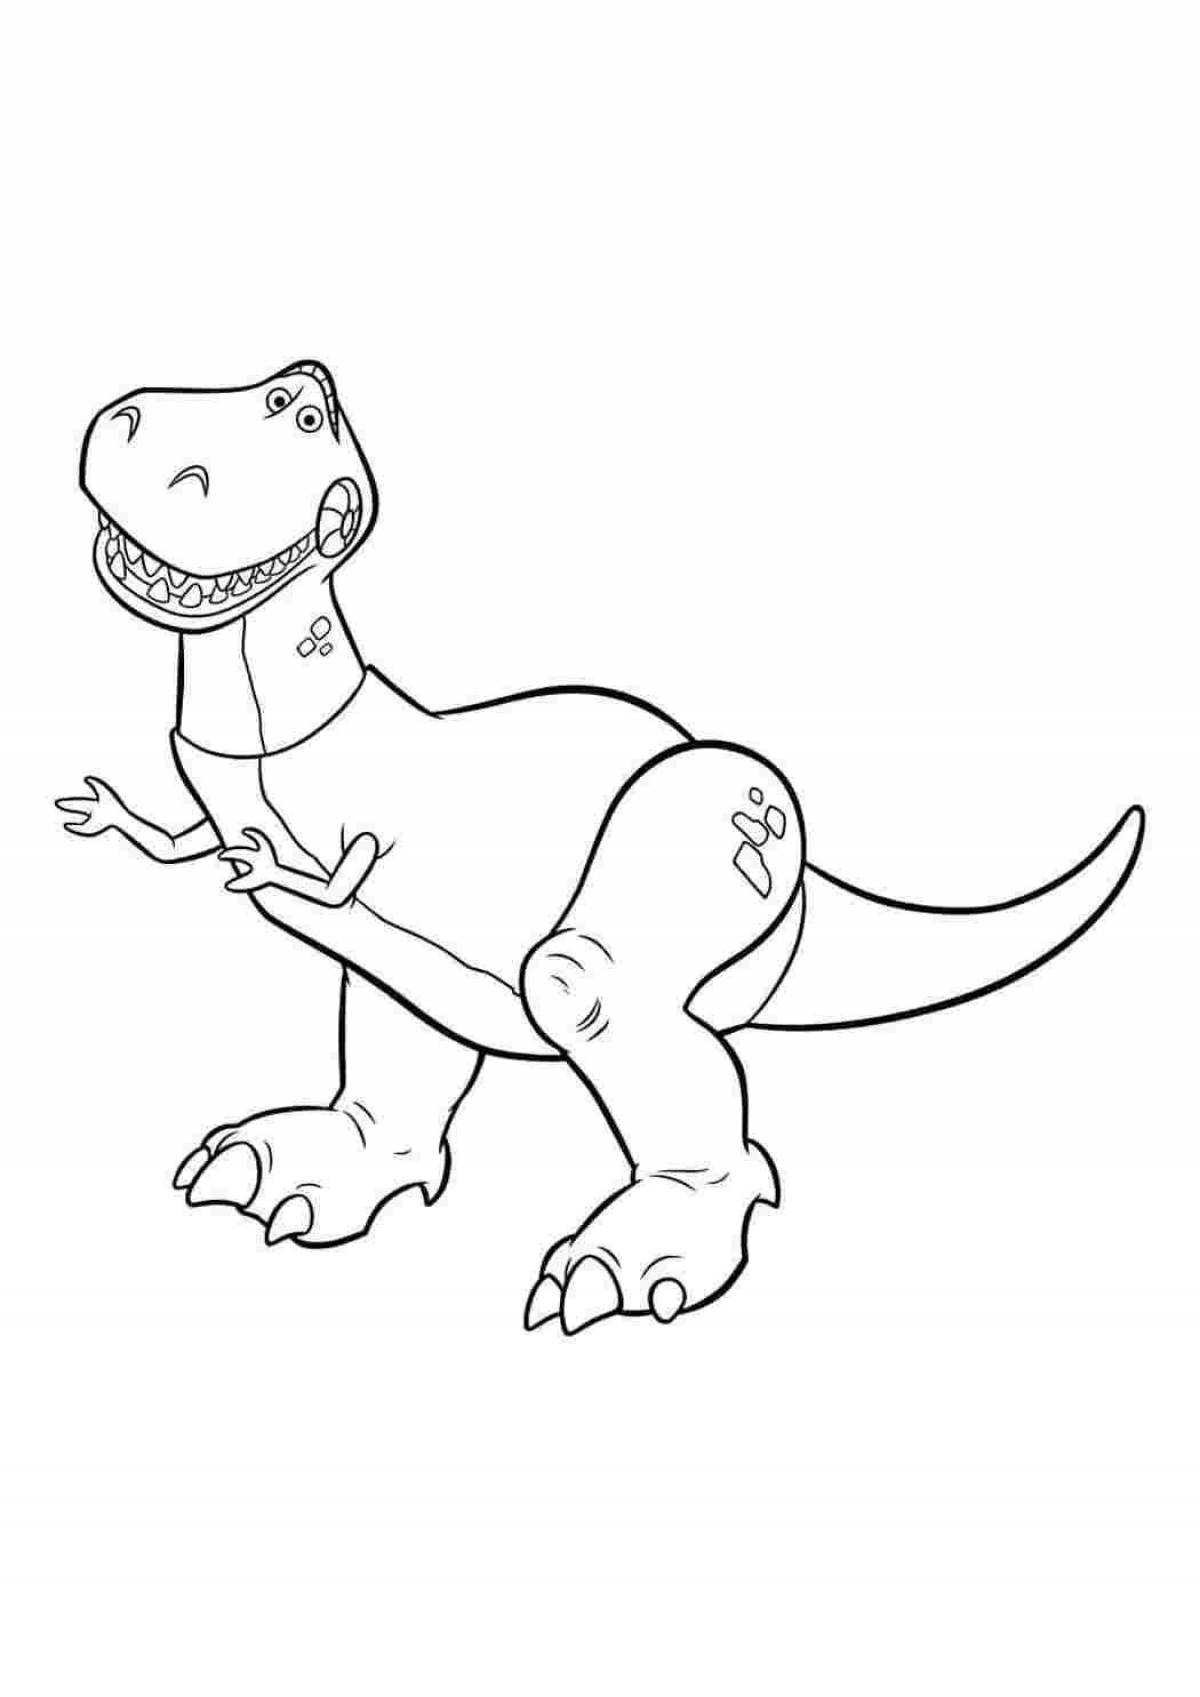 Large t-rex coloring page